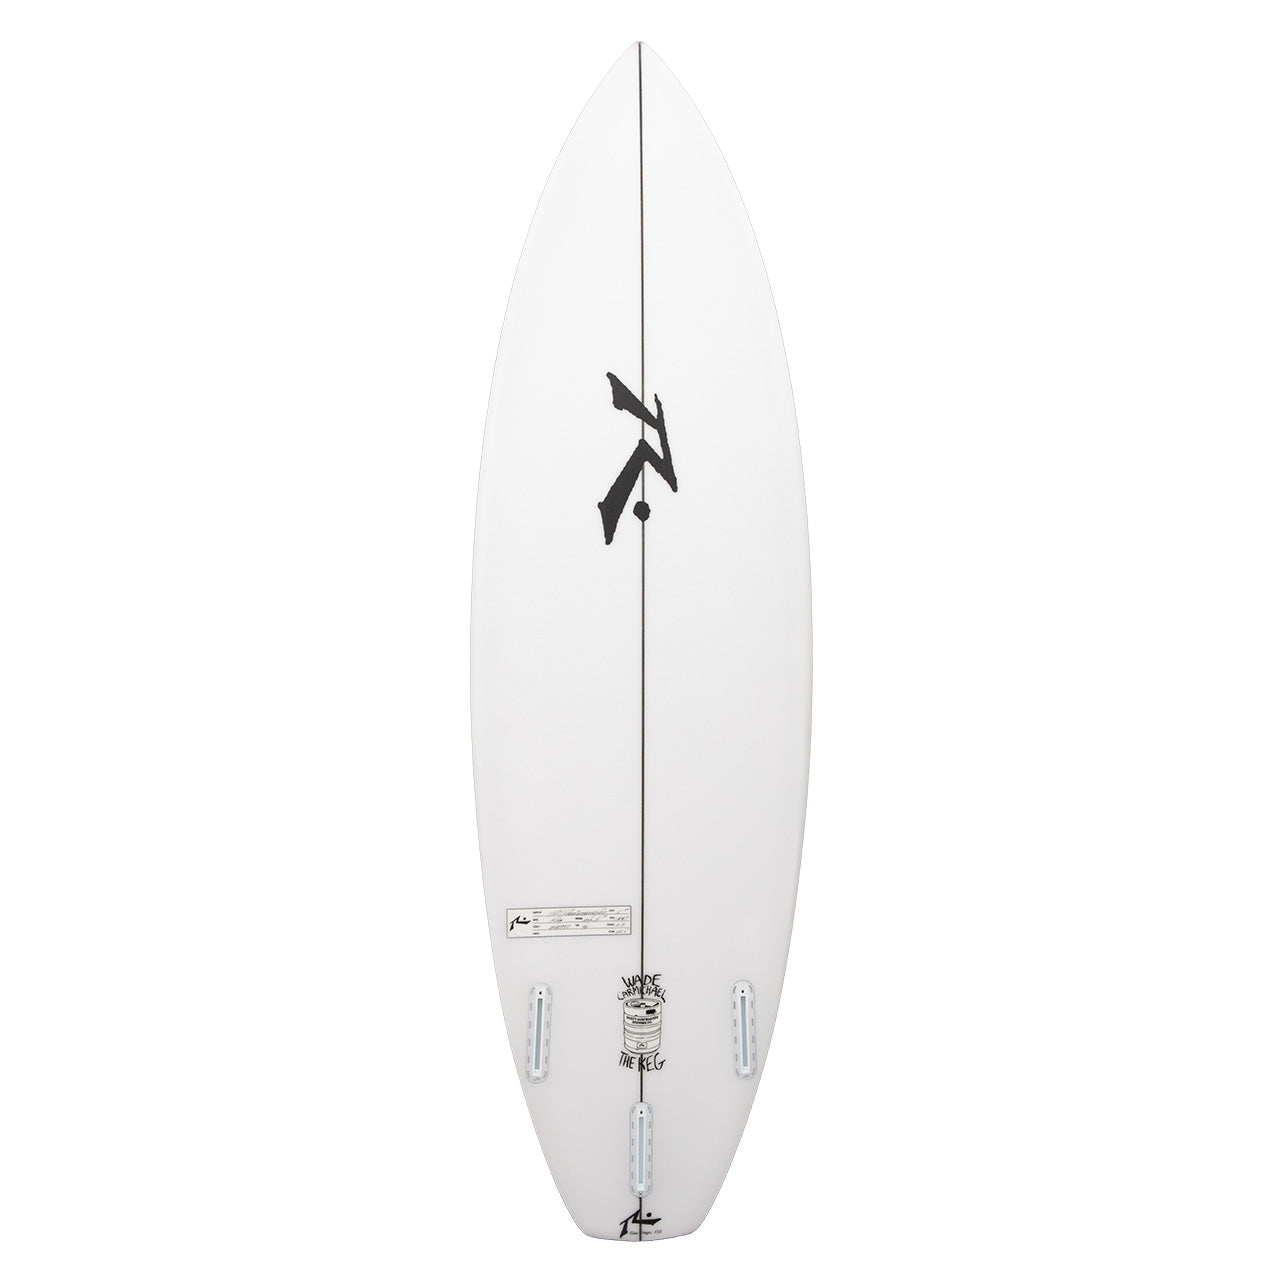 The Keg - High Performance Shortboard - In Stock - Deck View - Rusty Surfboards